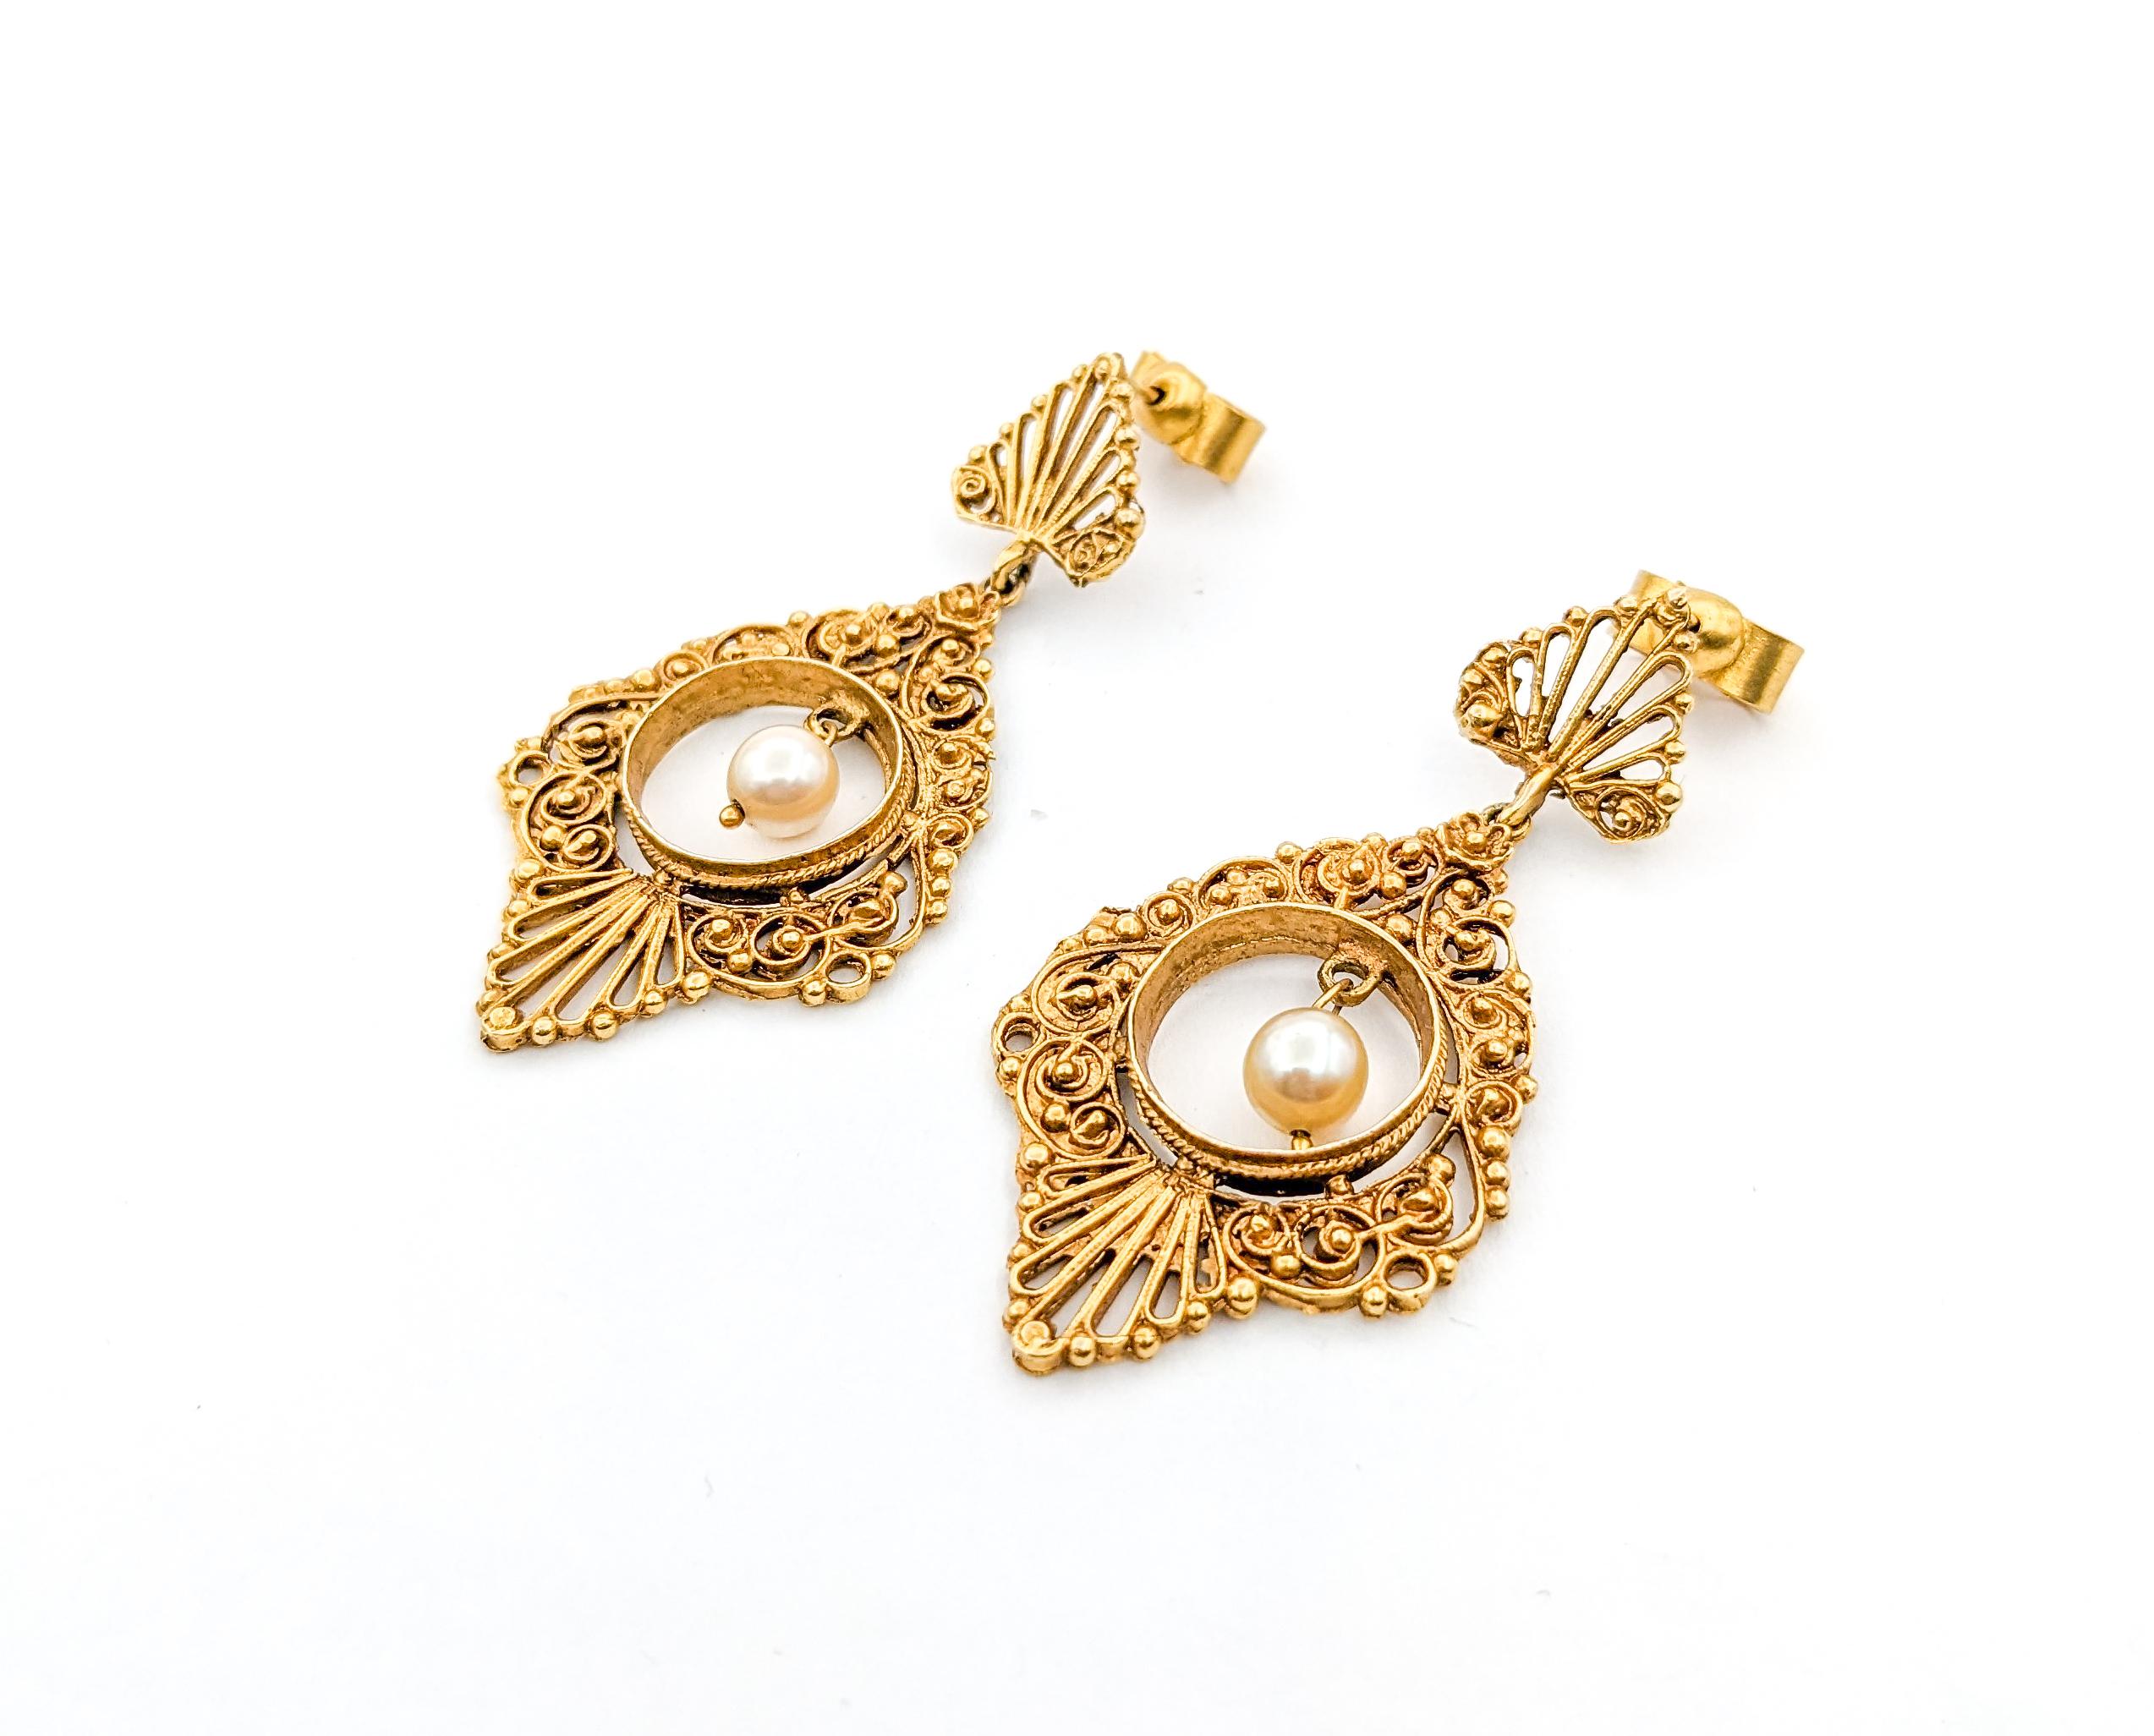 Romantic Vintage Filigree Pearl Drop Earrings in Yellow Gold For Sale 3